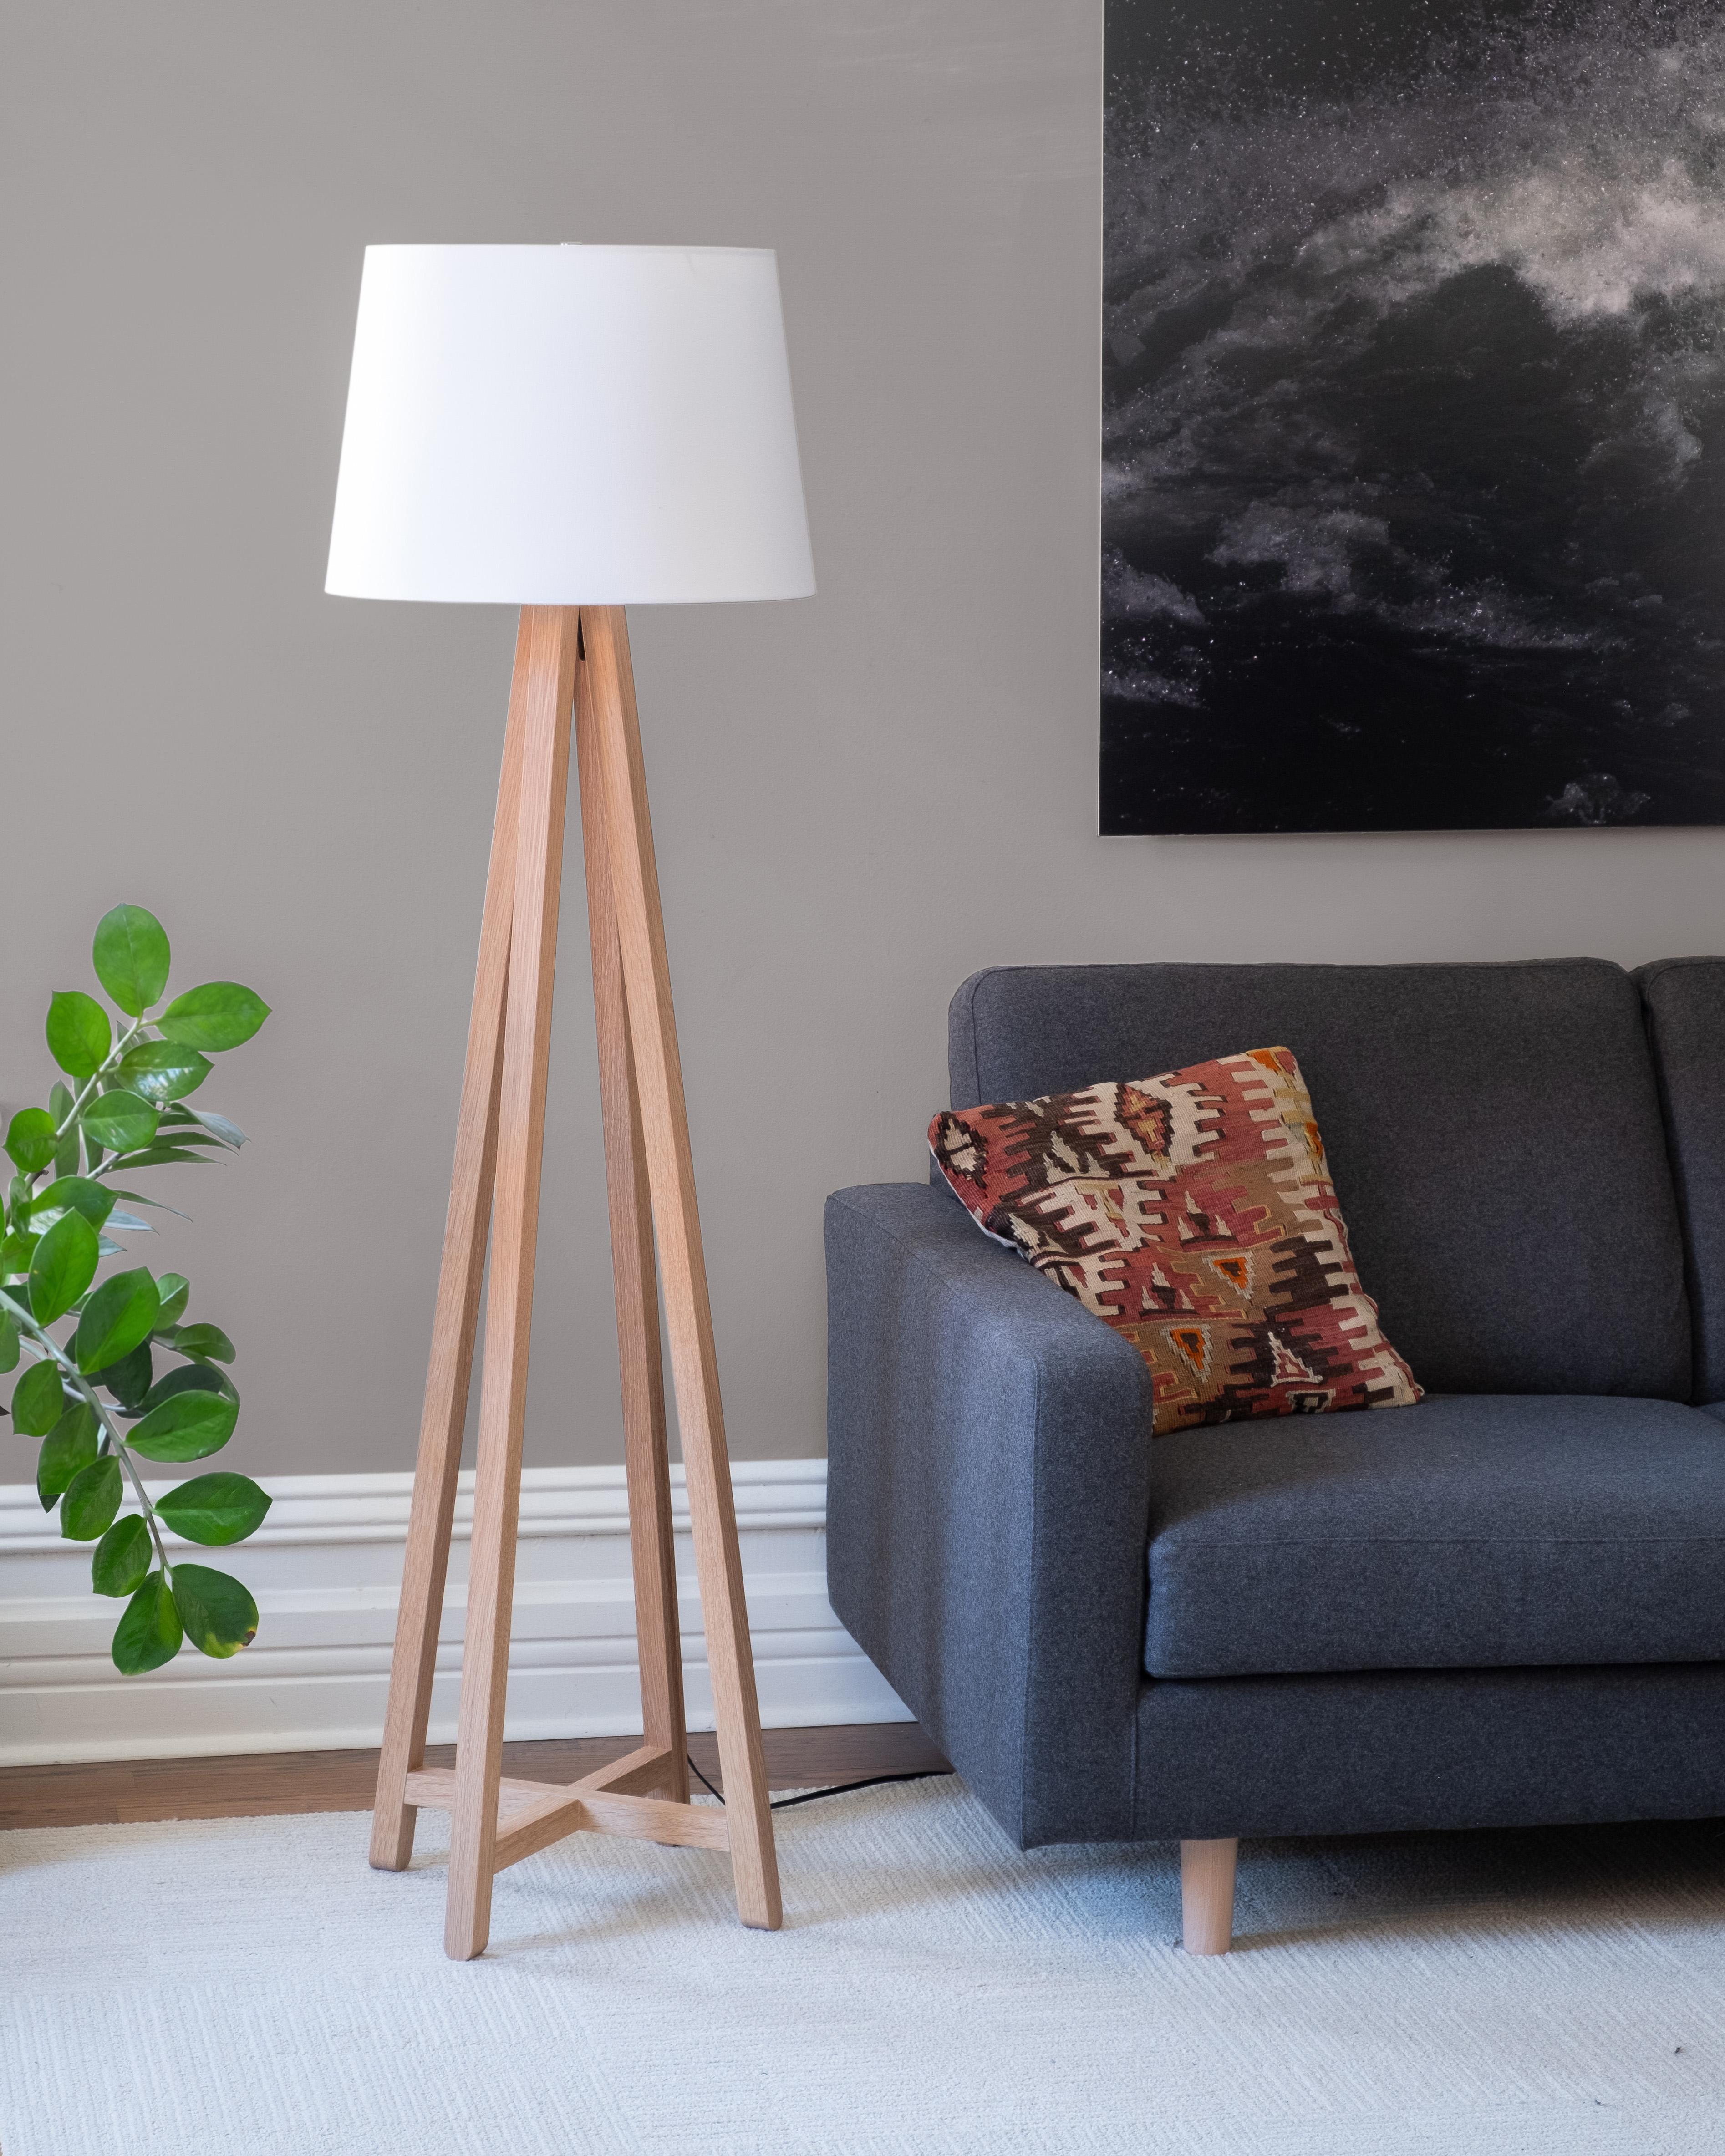 The Alpha floor lamp features a conical drum shade supported by a tapered framework of slender wooden legs. The lamp cord is hidden inside one of the legs to maintain a clean, uncluttered appearance.

The Alpha is available in two sizes: the